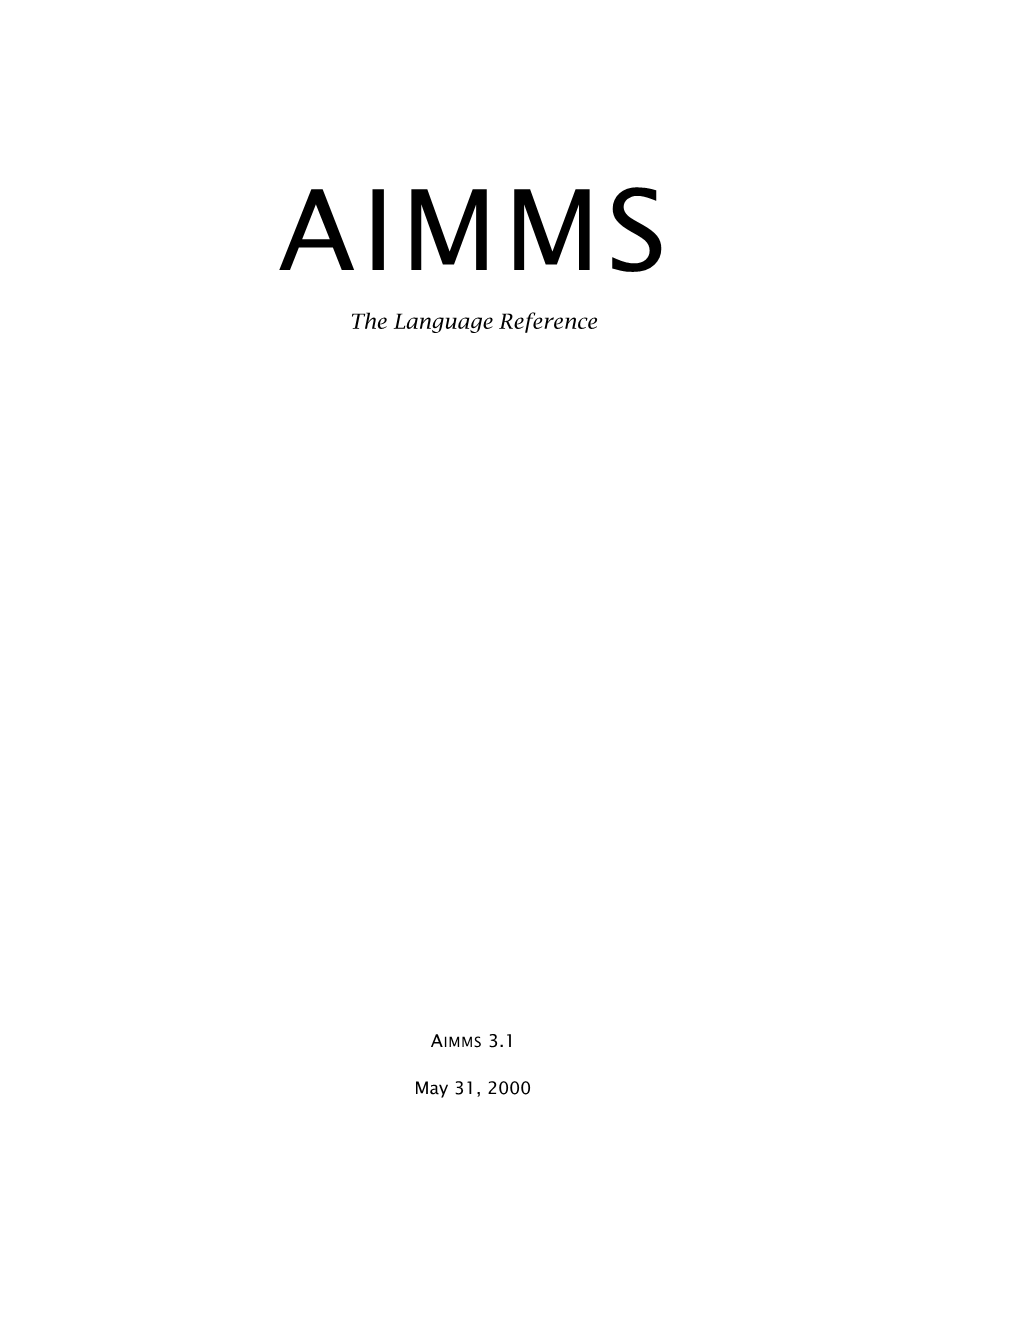 The AIMMS Language Reference